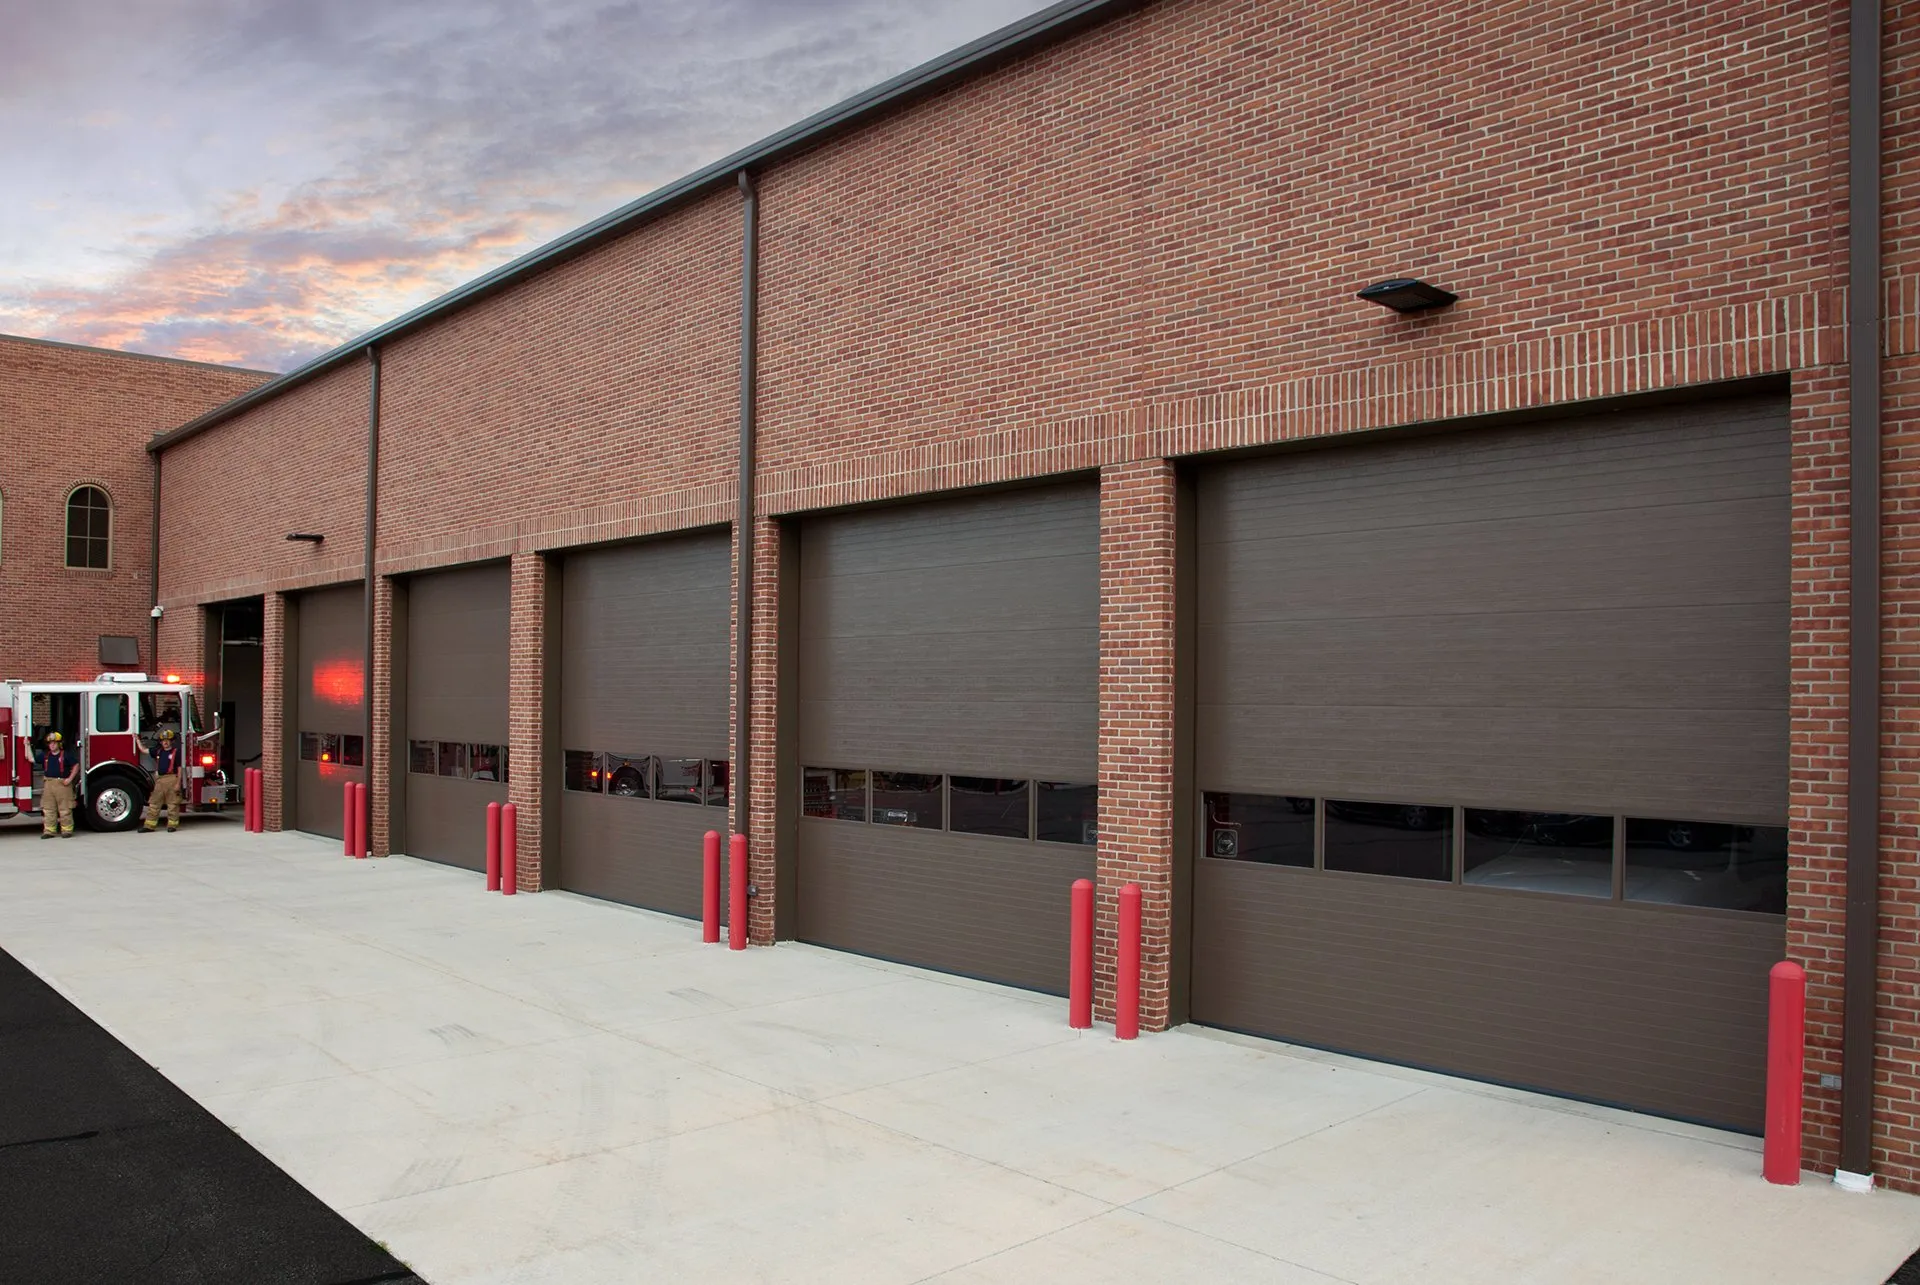 Picture of a red brick fire station with black garage doors.